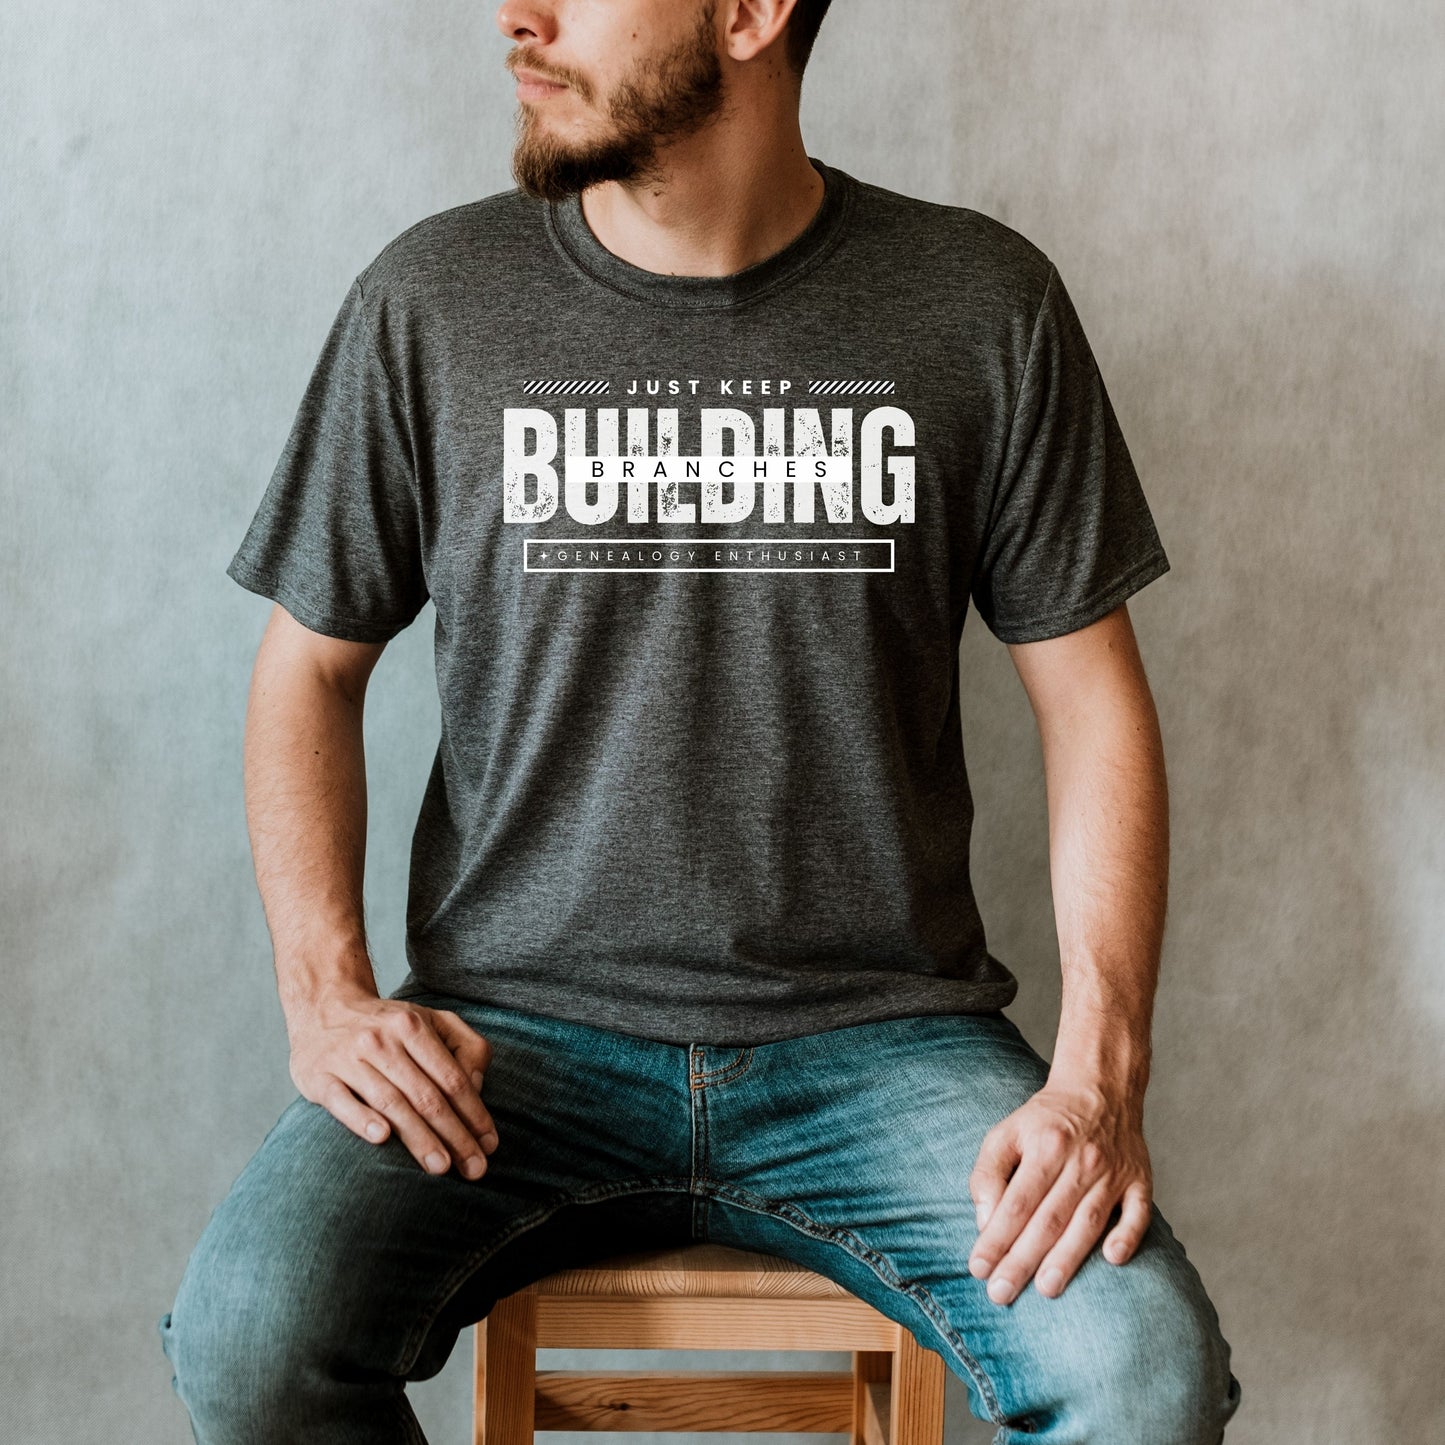 Just Keep Building Branches Genealogy T-Shirt